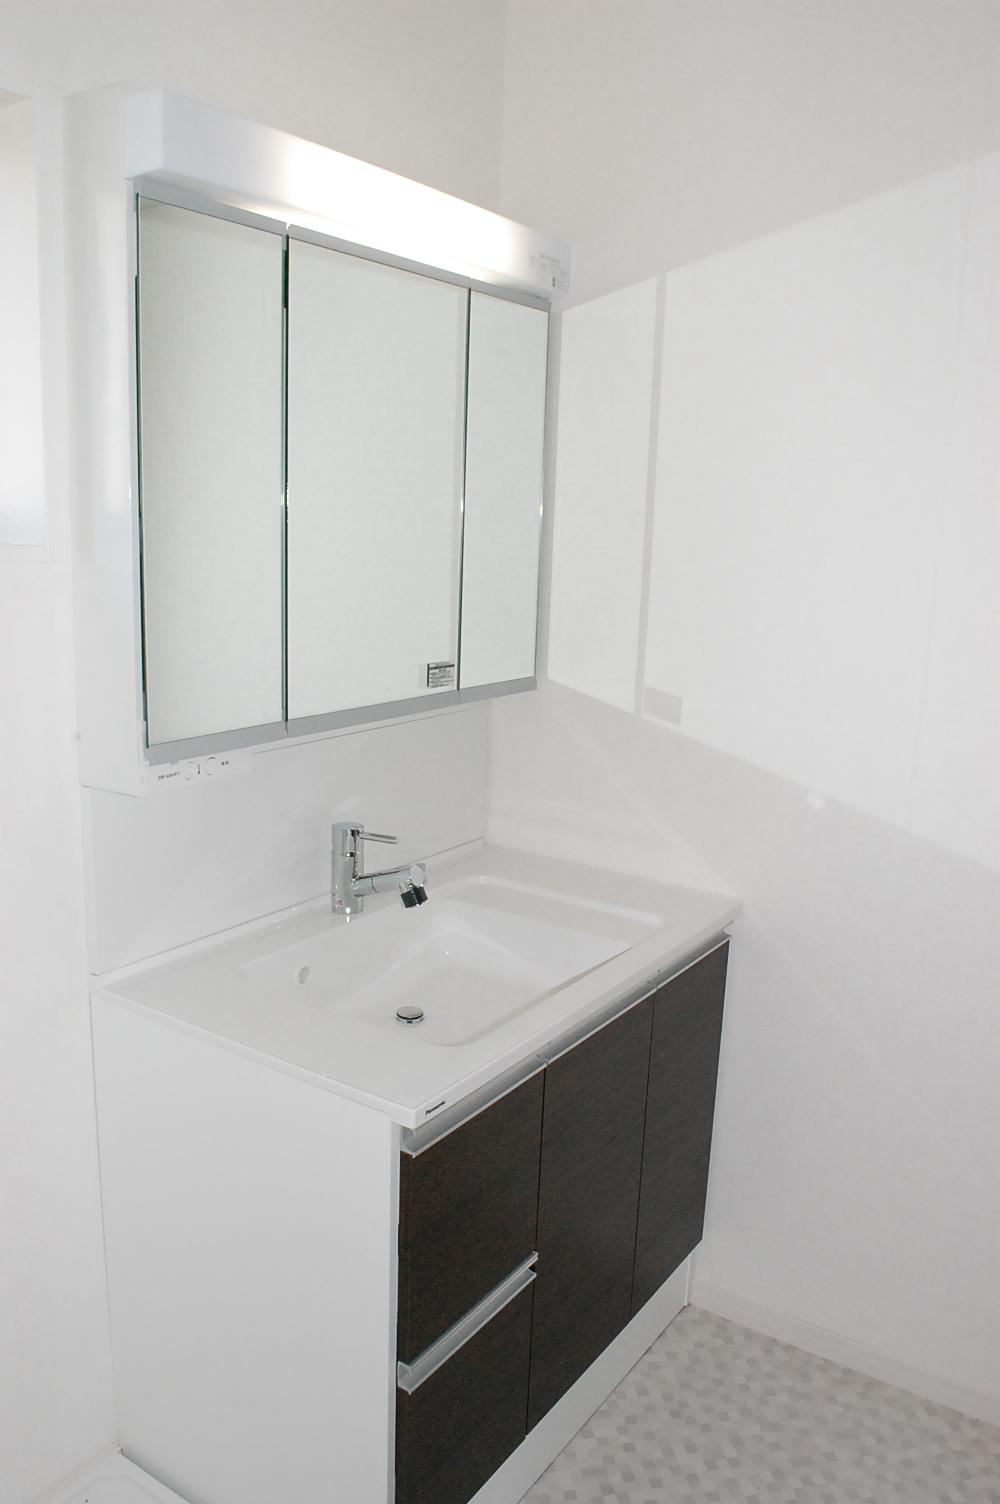 Wash basin, toilet. Vanity wide size three-sided mirror, Panasonic. Shower Faucets